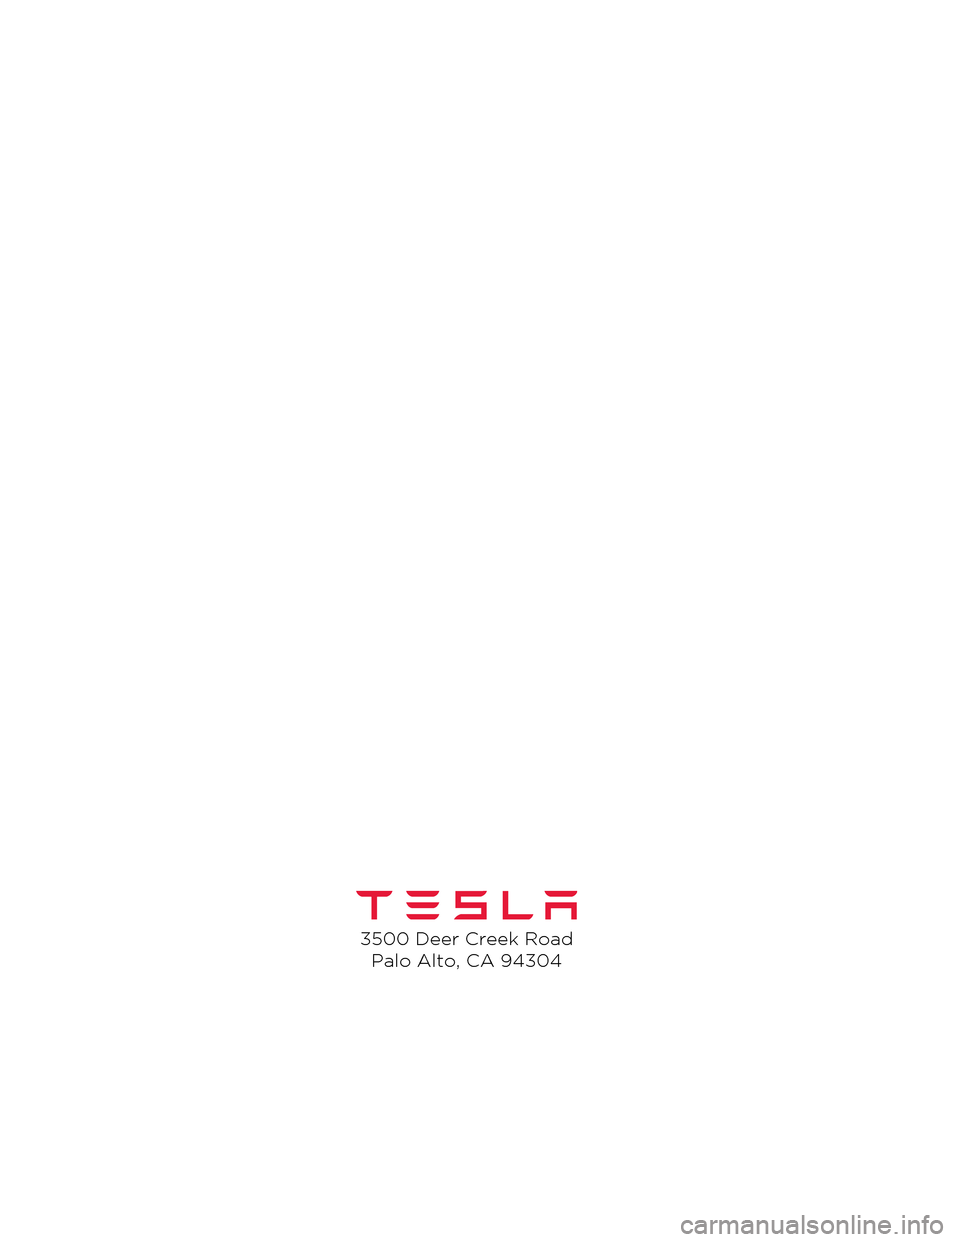 TESLA MODEL S 2014  Owners manual (North America) 3500 Deer Creek RoadPalo Alto, CA 94304
Model S Quick Guide - NA Rev C.book  Page  2  Wednesday, December 18, 2013  12:40 PM 